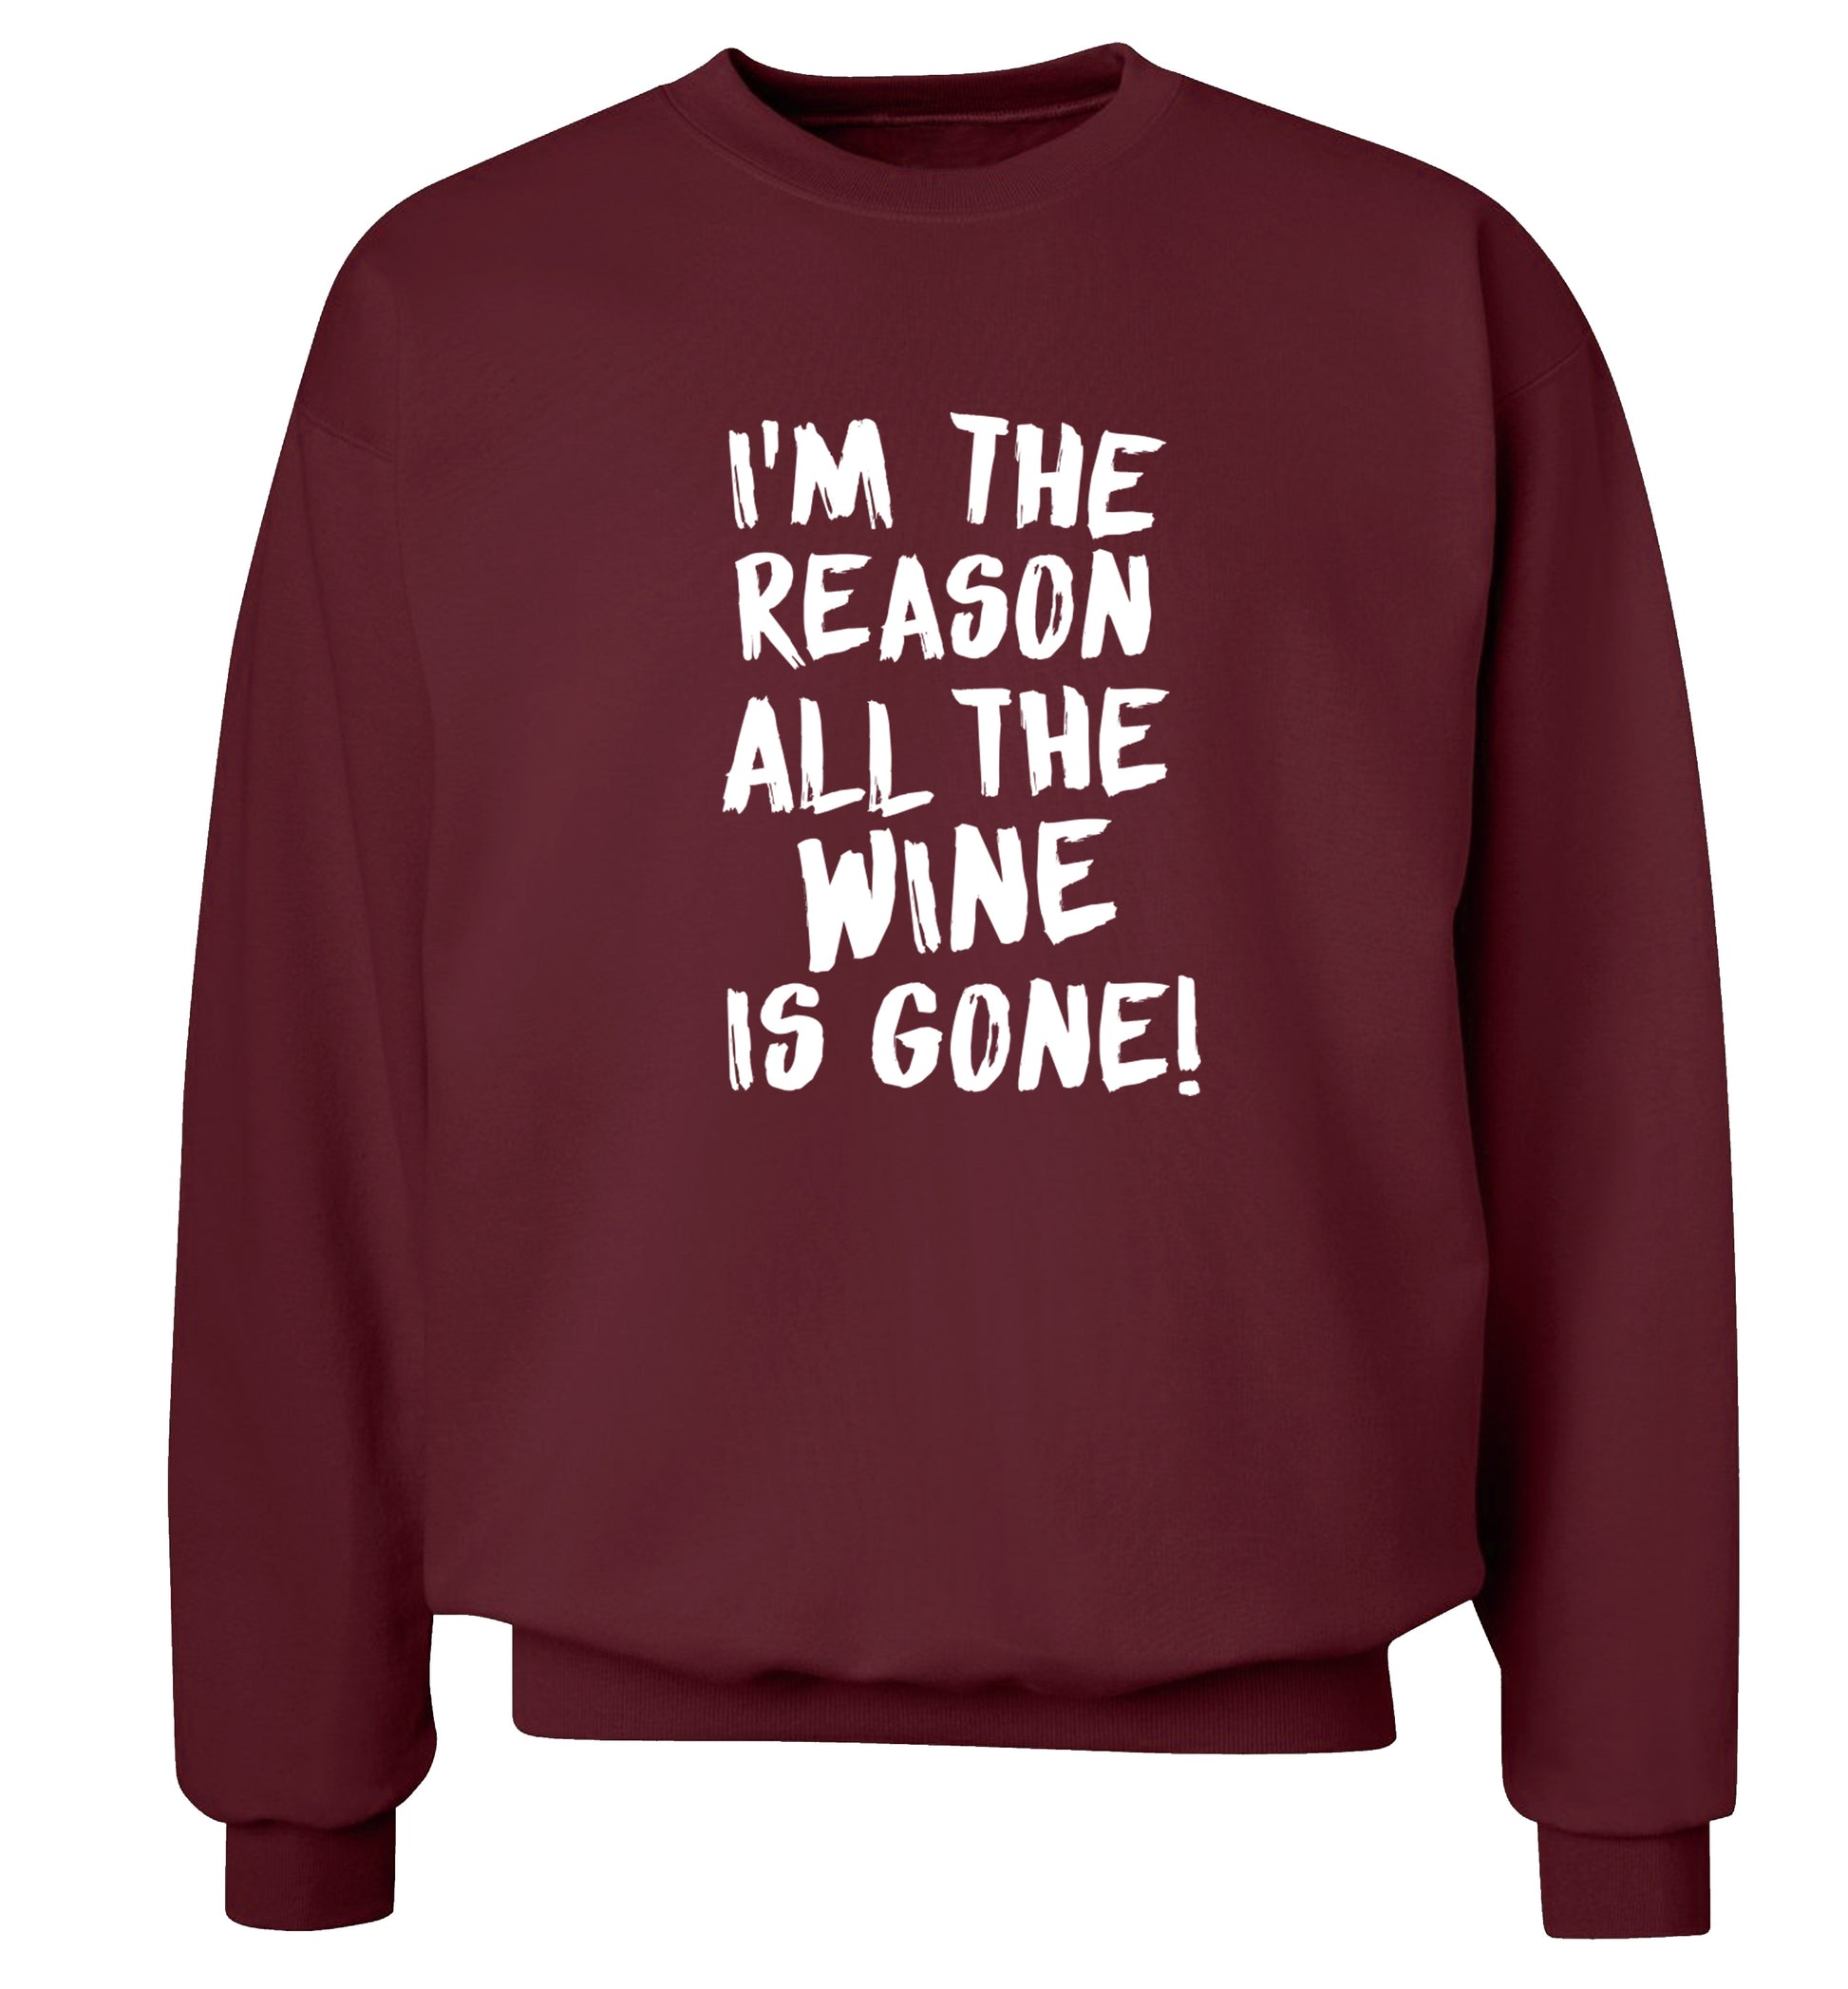 I'm the reason all the wine is gone Adult's unisex maroon Sweater 2XL